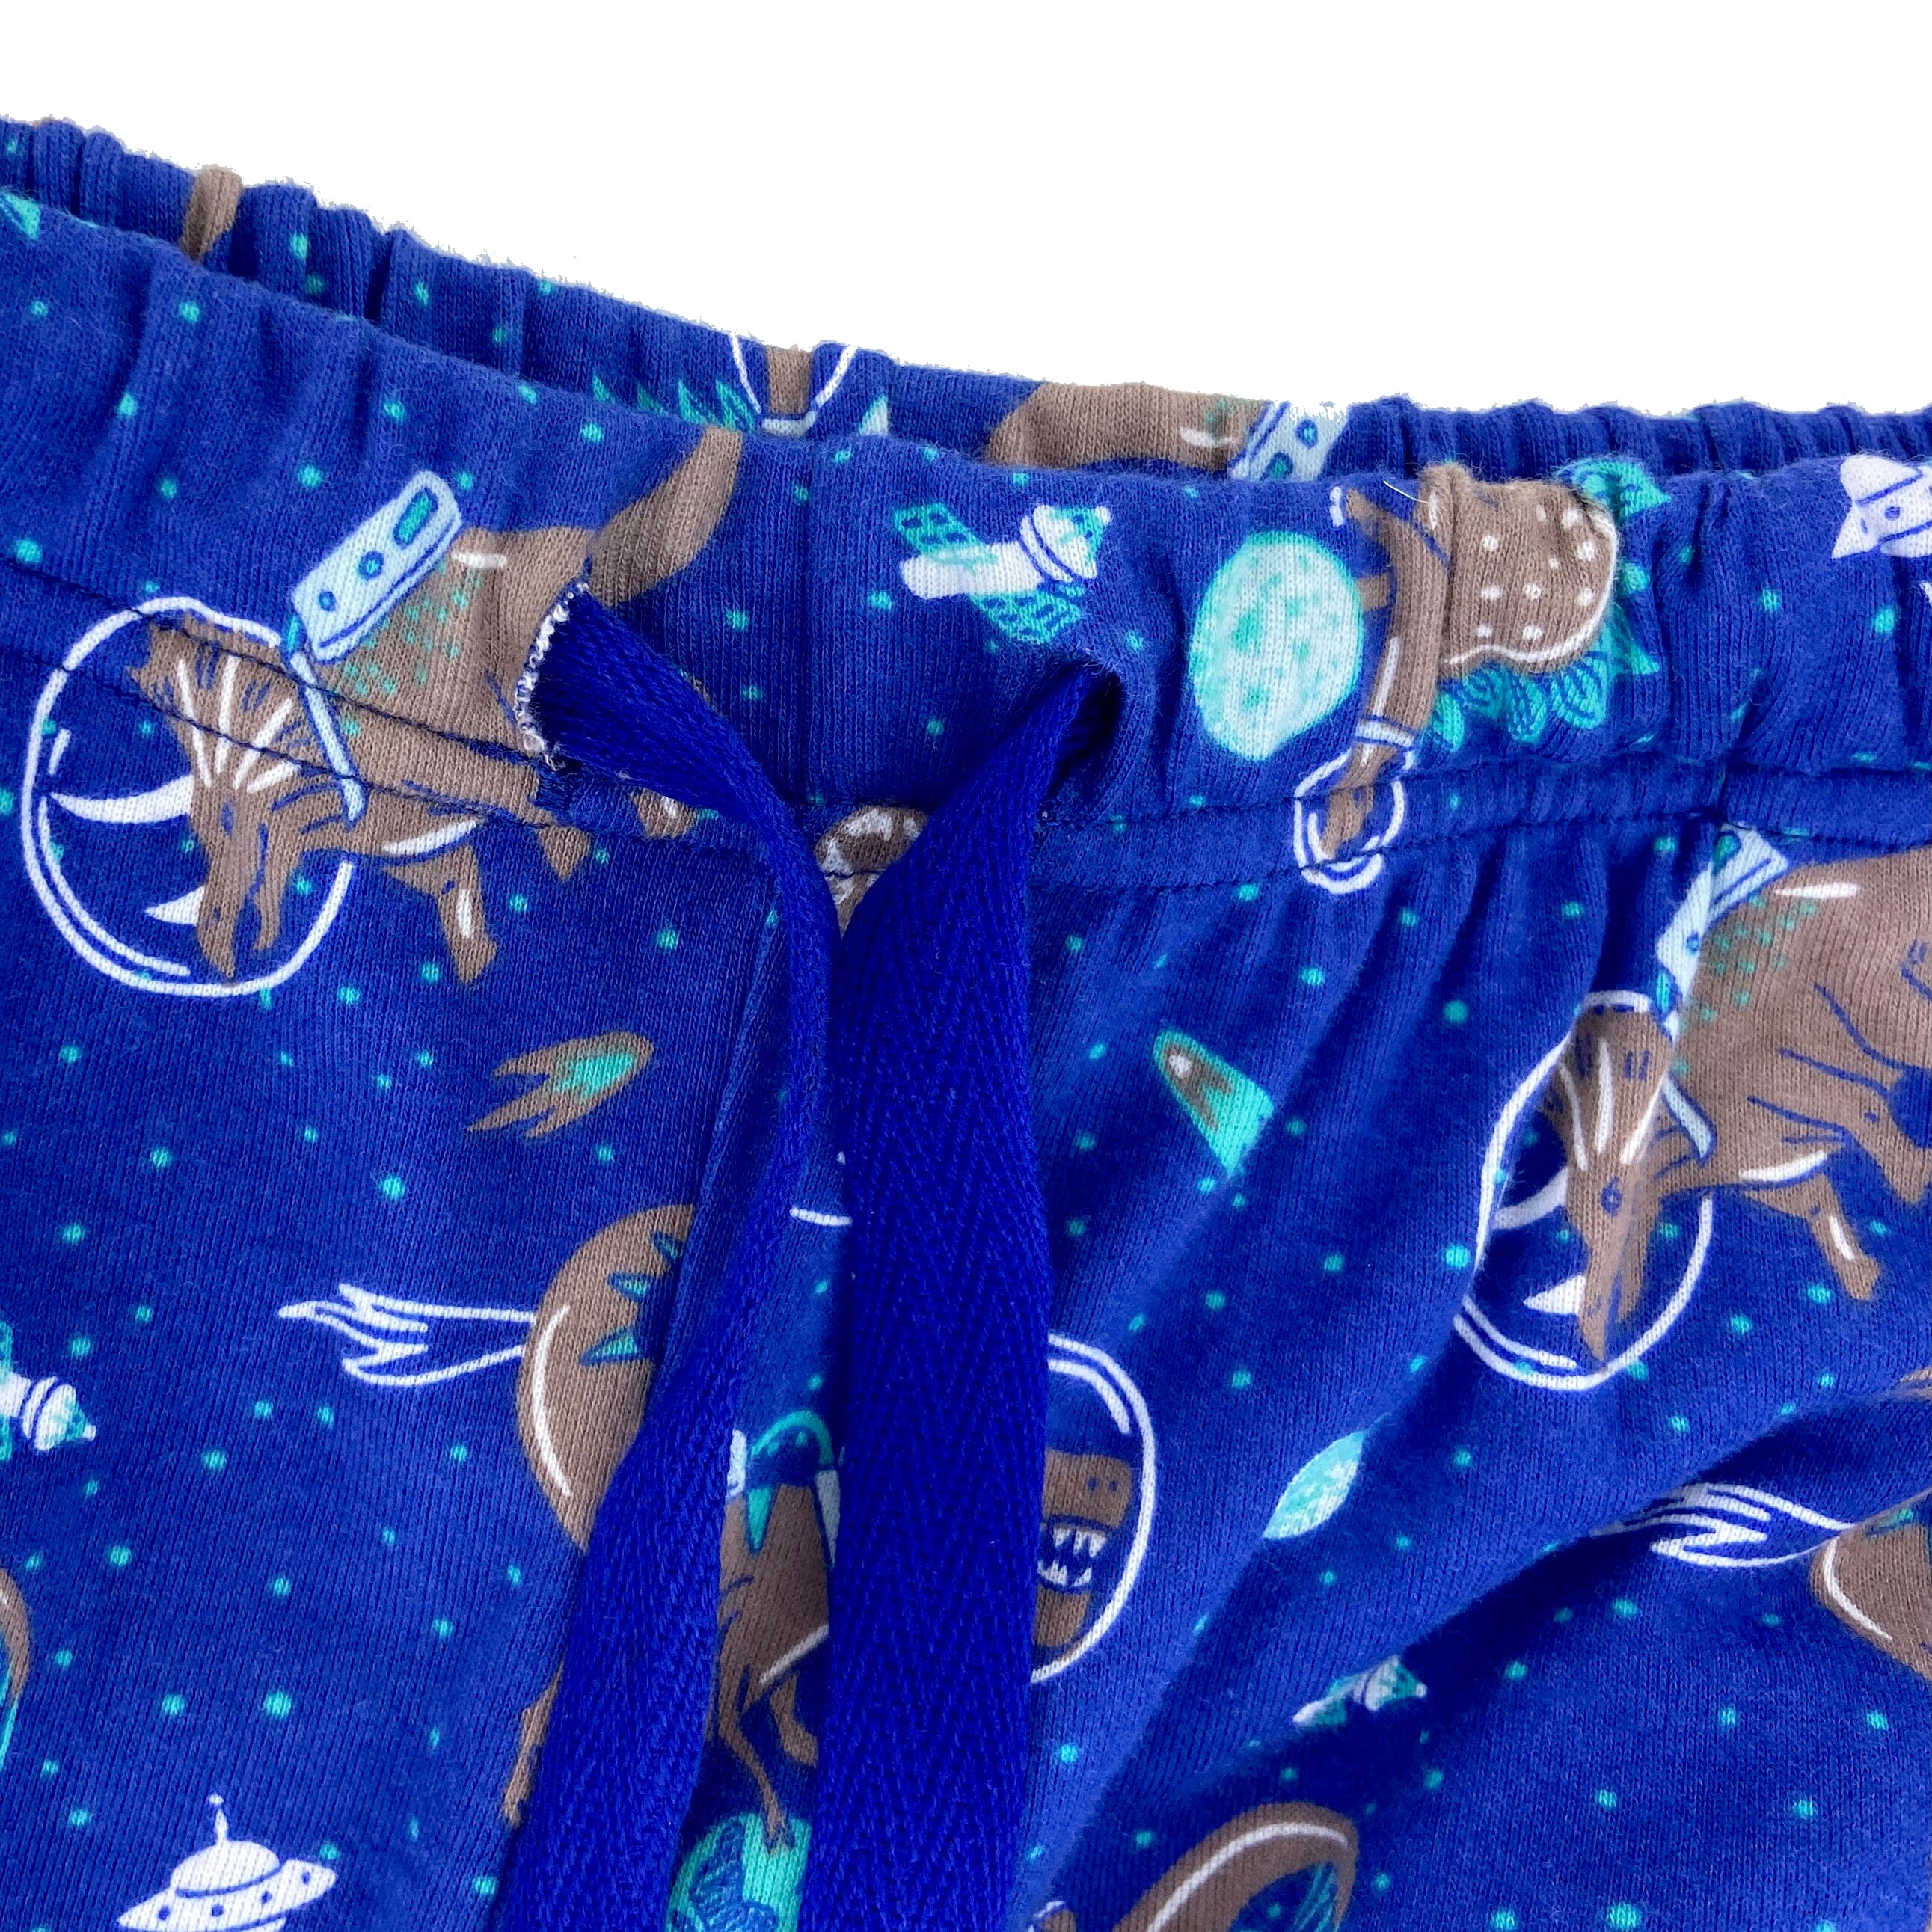 Men's Dinosaurs in Outer Space Pattern Cotton Knit Pajama Pant Bottoms